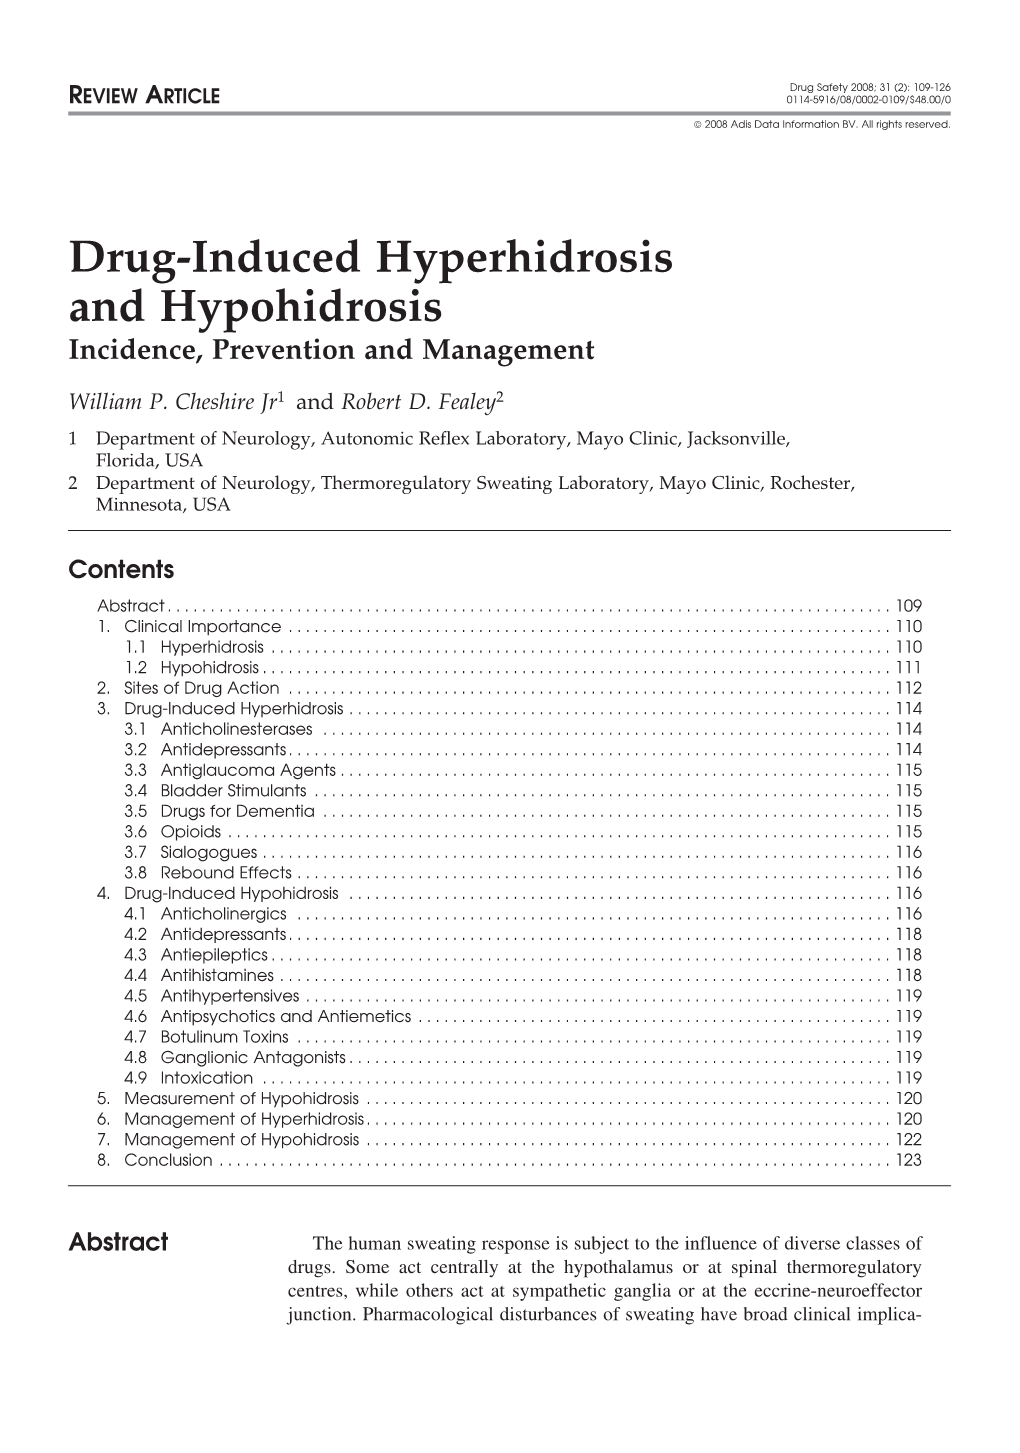 Drug-Induced Hyperhidrosis and Hypohidrosis Incidence, Prevention and Management